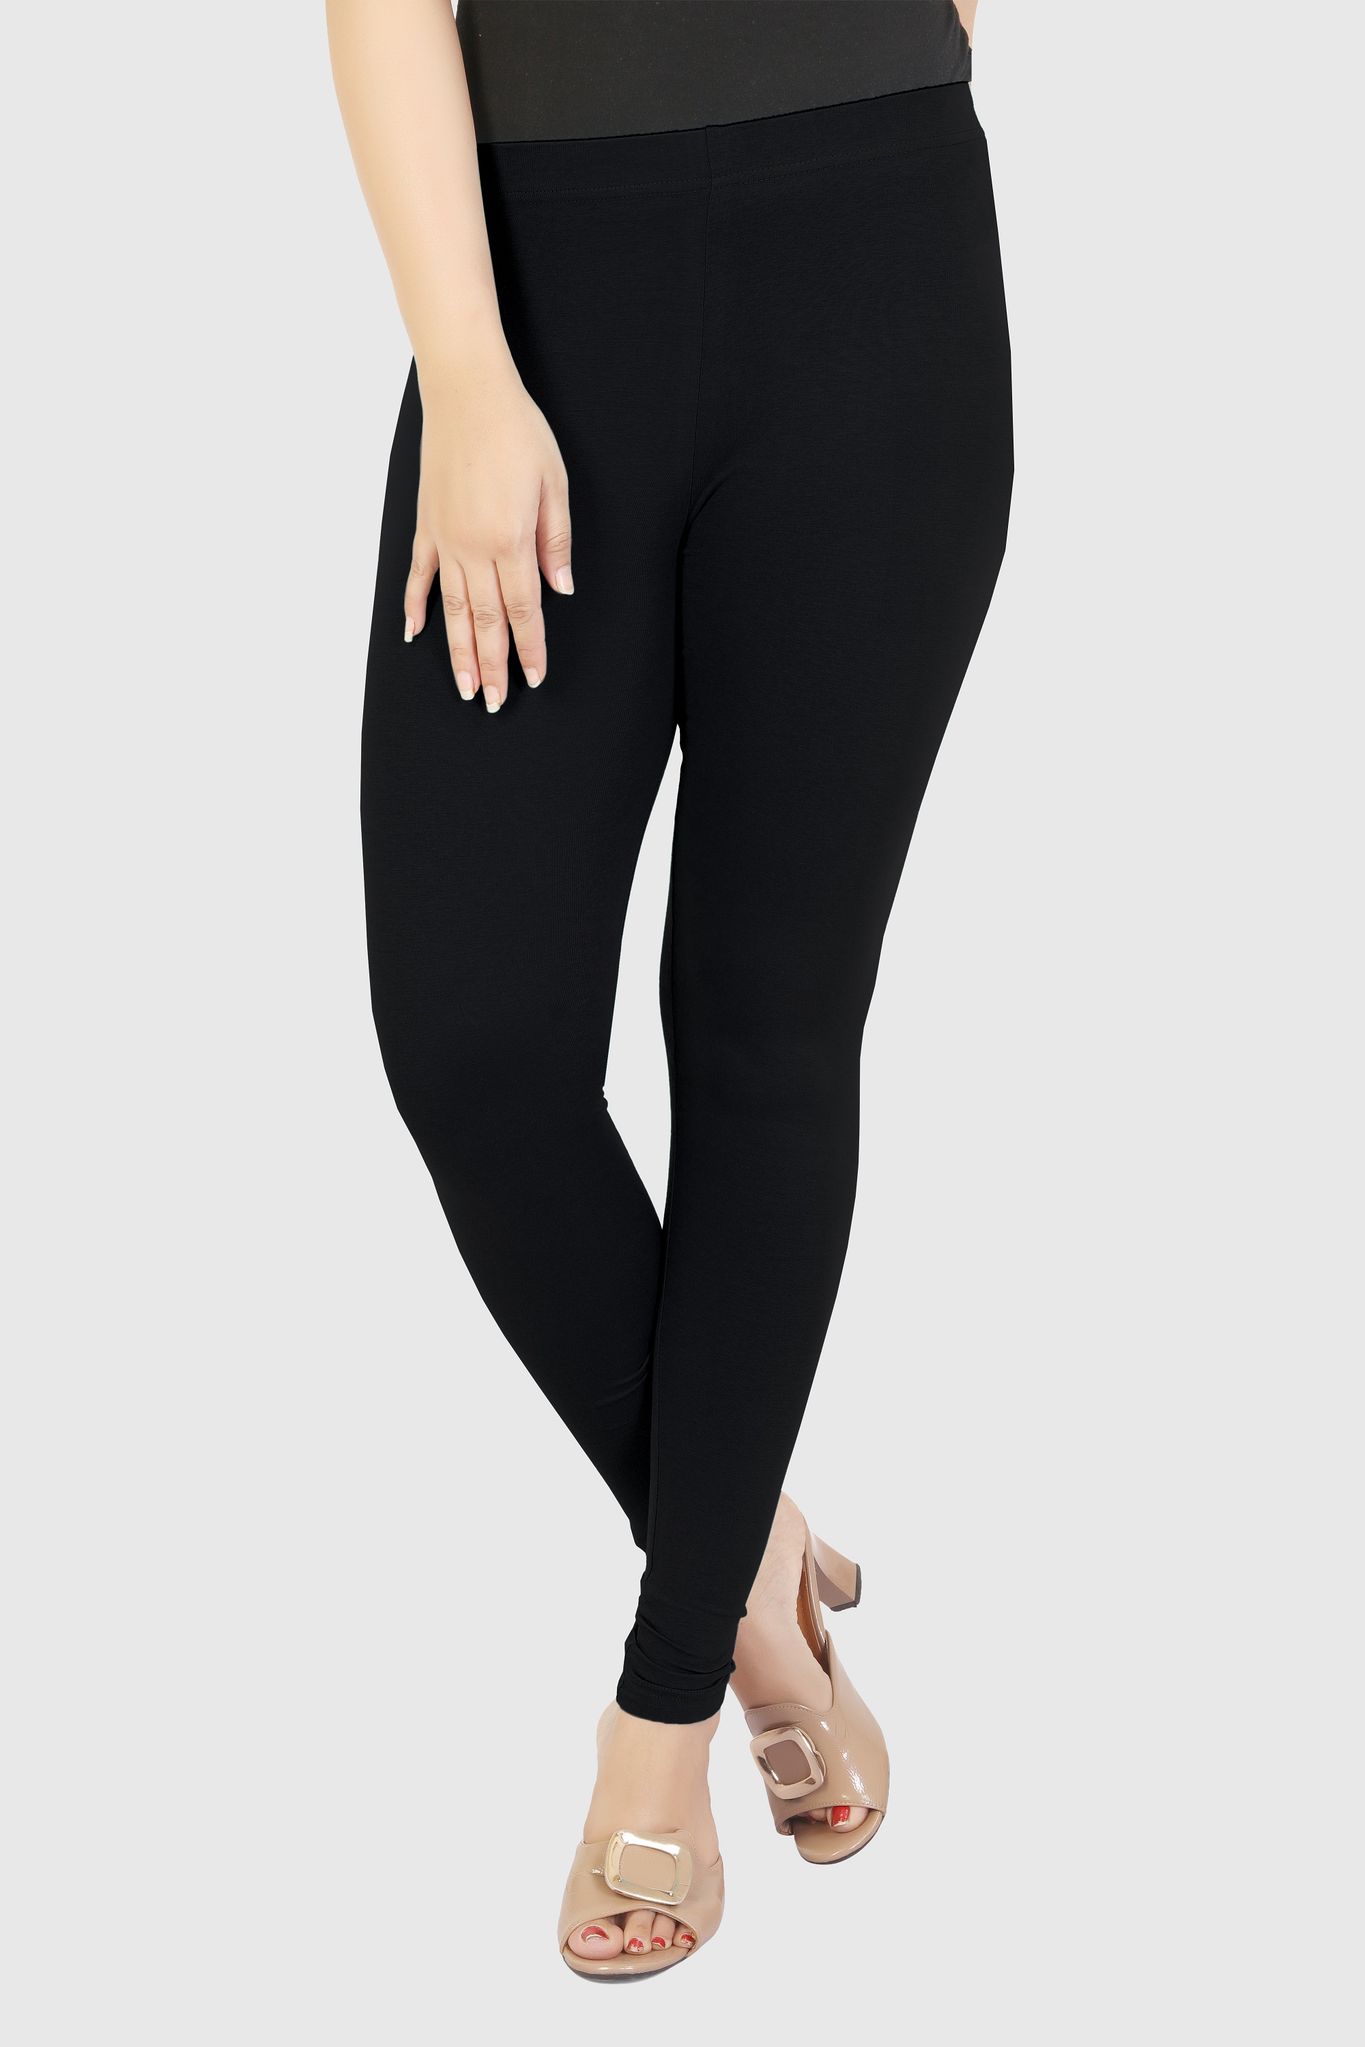 TAG 7 PLUS Women Pack Of 2 Solid Plus Size Ankle-Length Leggings Price in  India, Full Specifications & Offers | DTashion.com